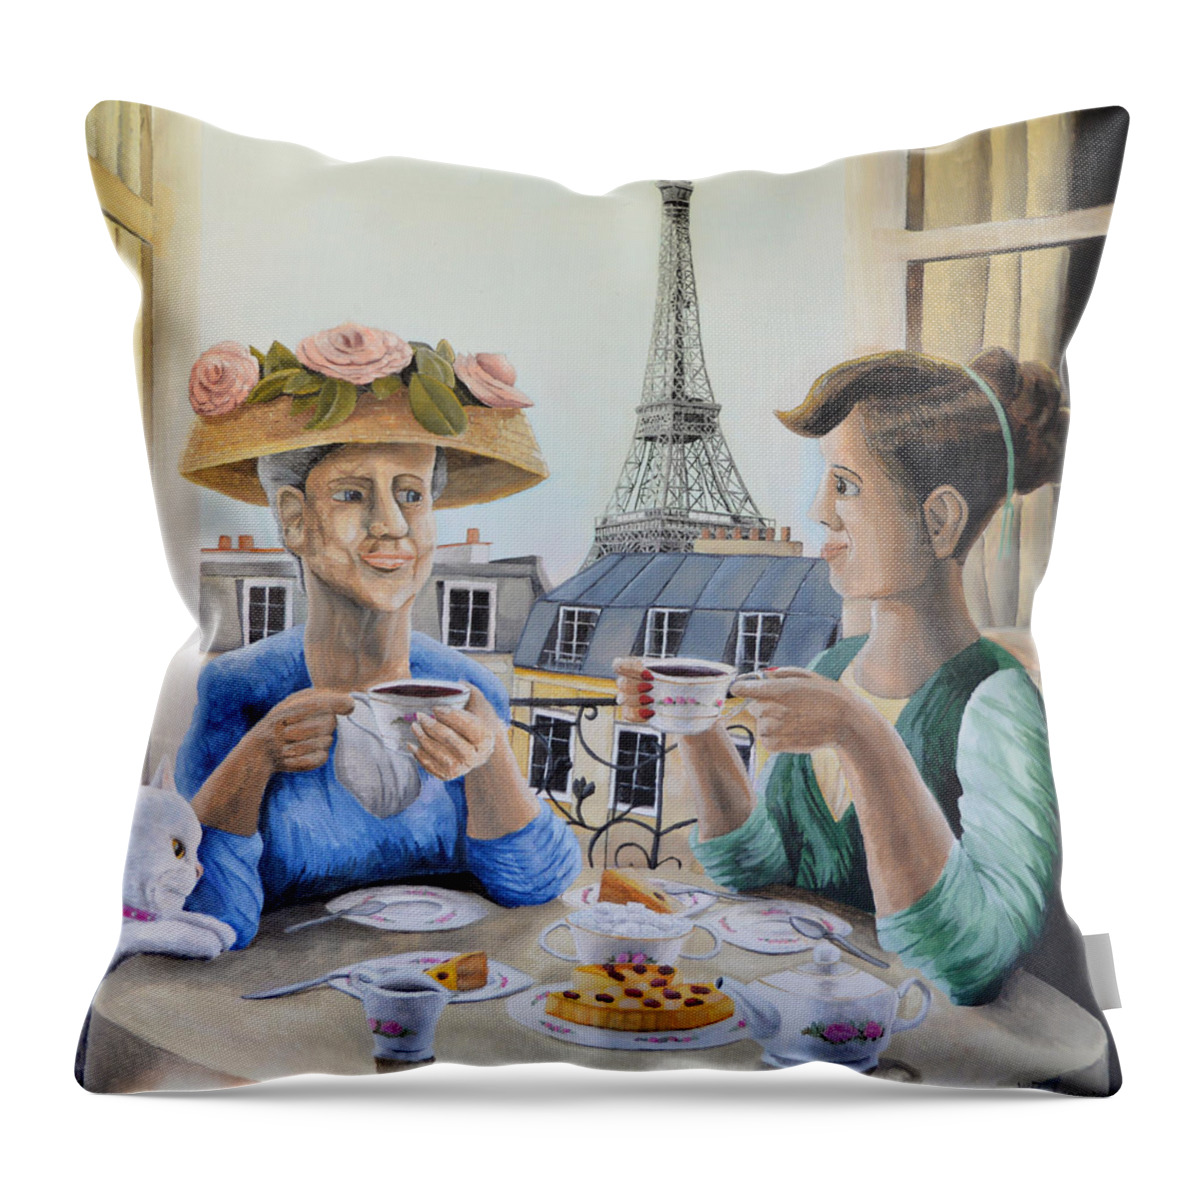 Tea Time In Paris Throw Pillow featuring the painting Tea Time in Paris by Winton Bochanowicz